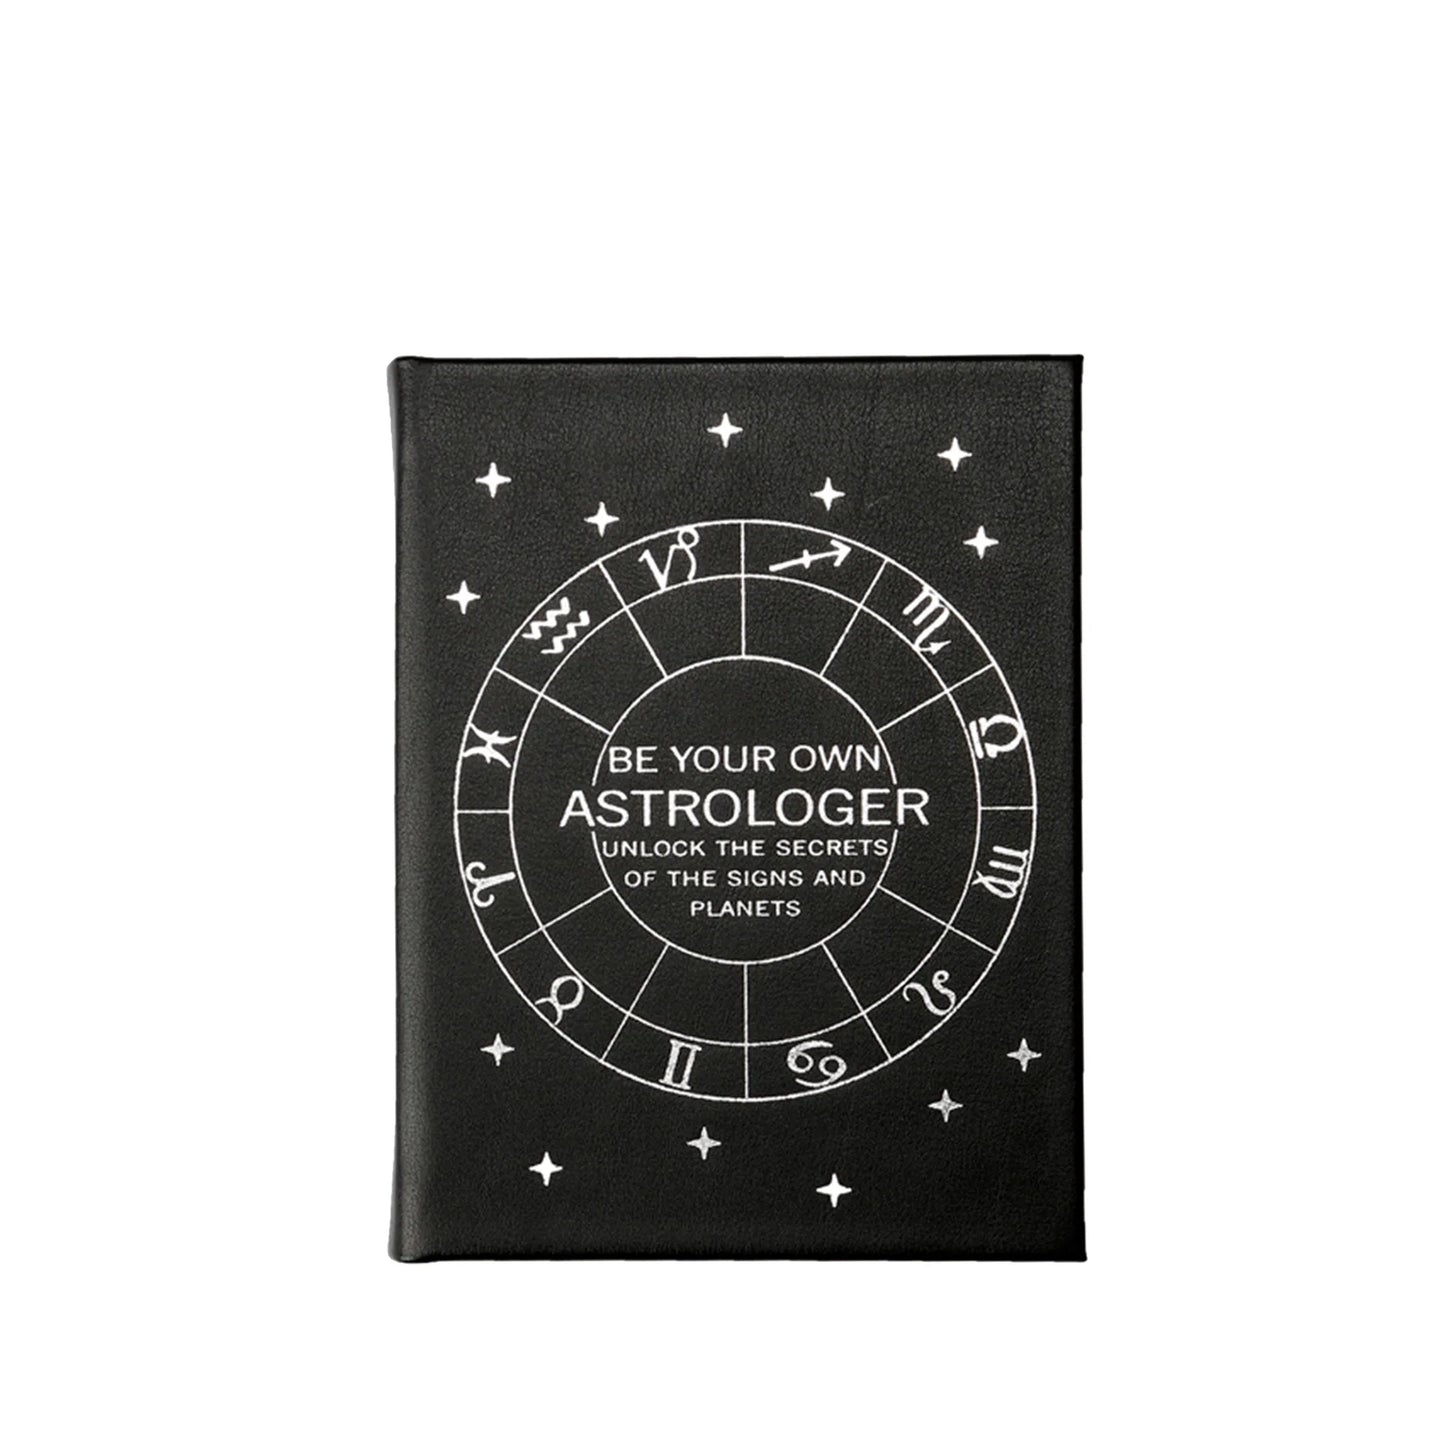 Be Your Own Astrologer, Black Bonded Leather